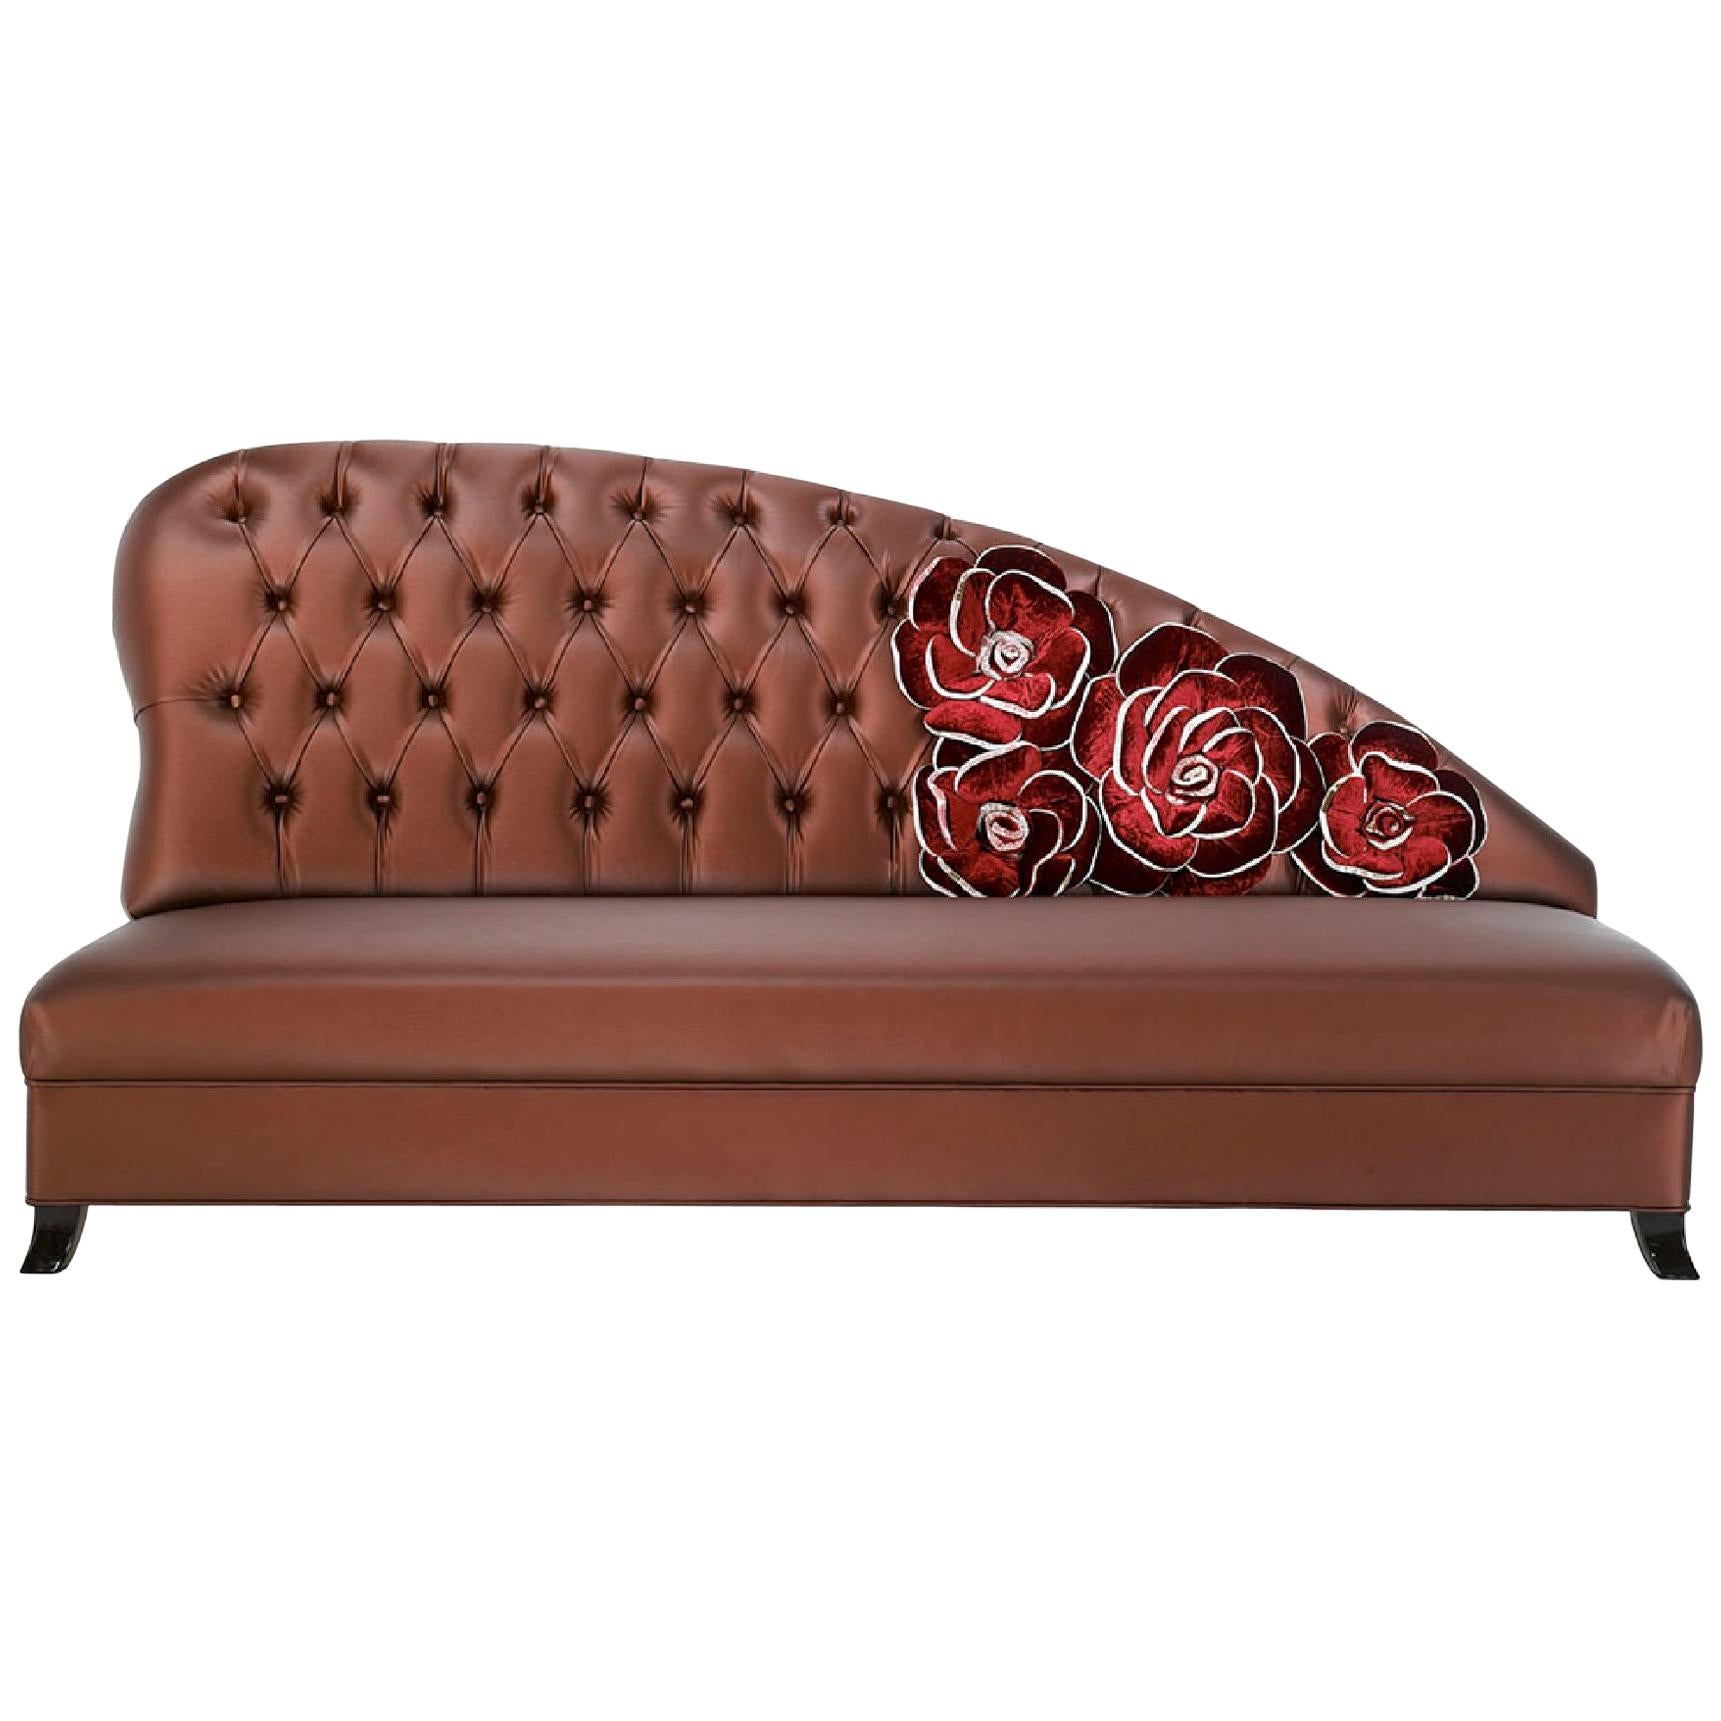 Beautiful Sofa with Decorative Silk Velvet Fabric Flowers on the Back For Sale